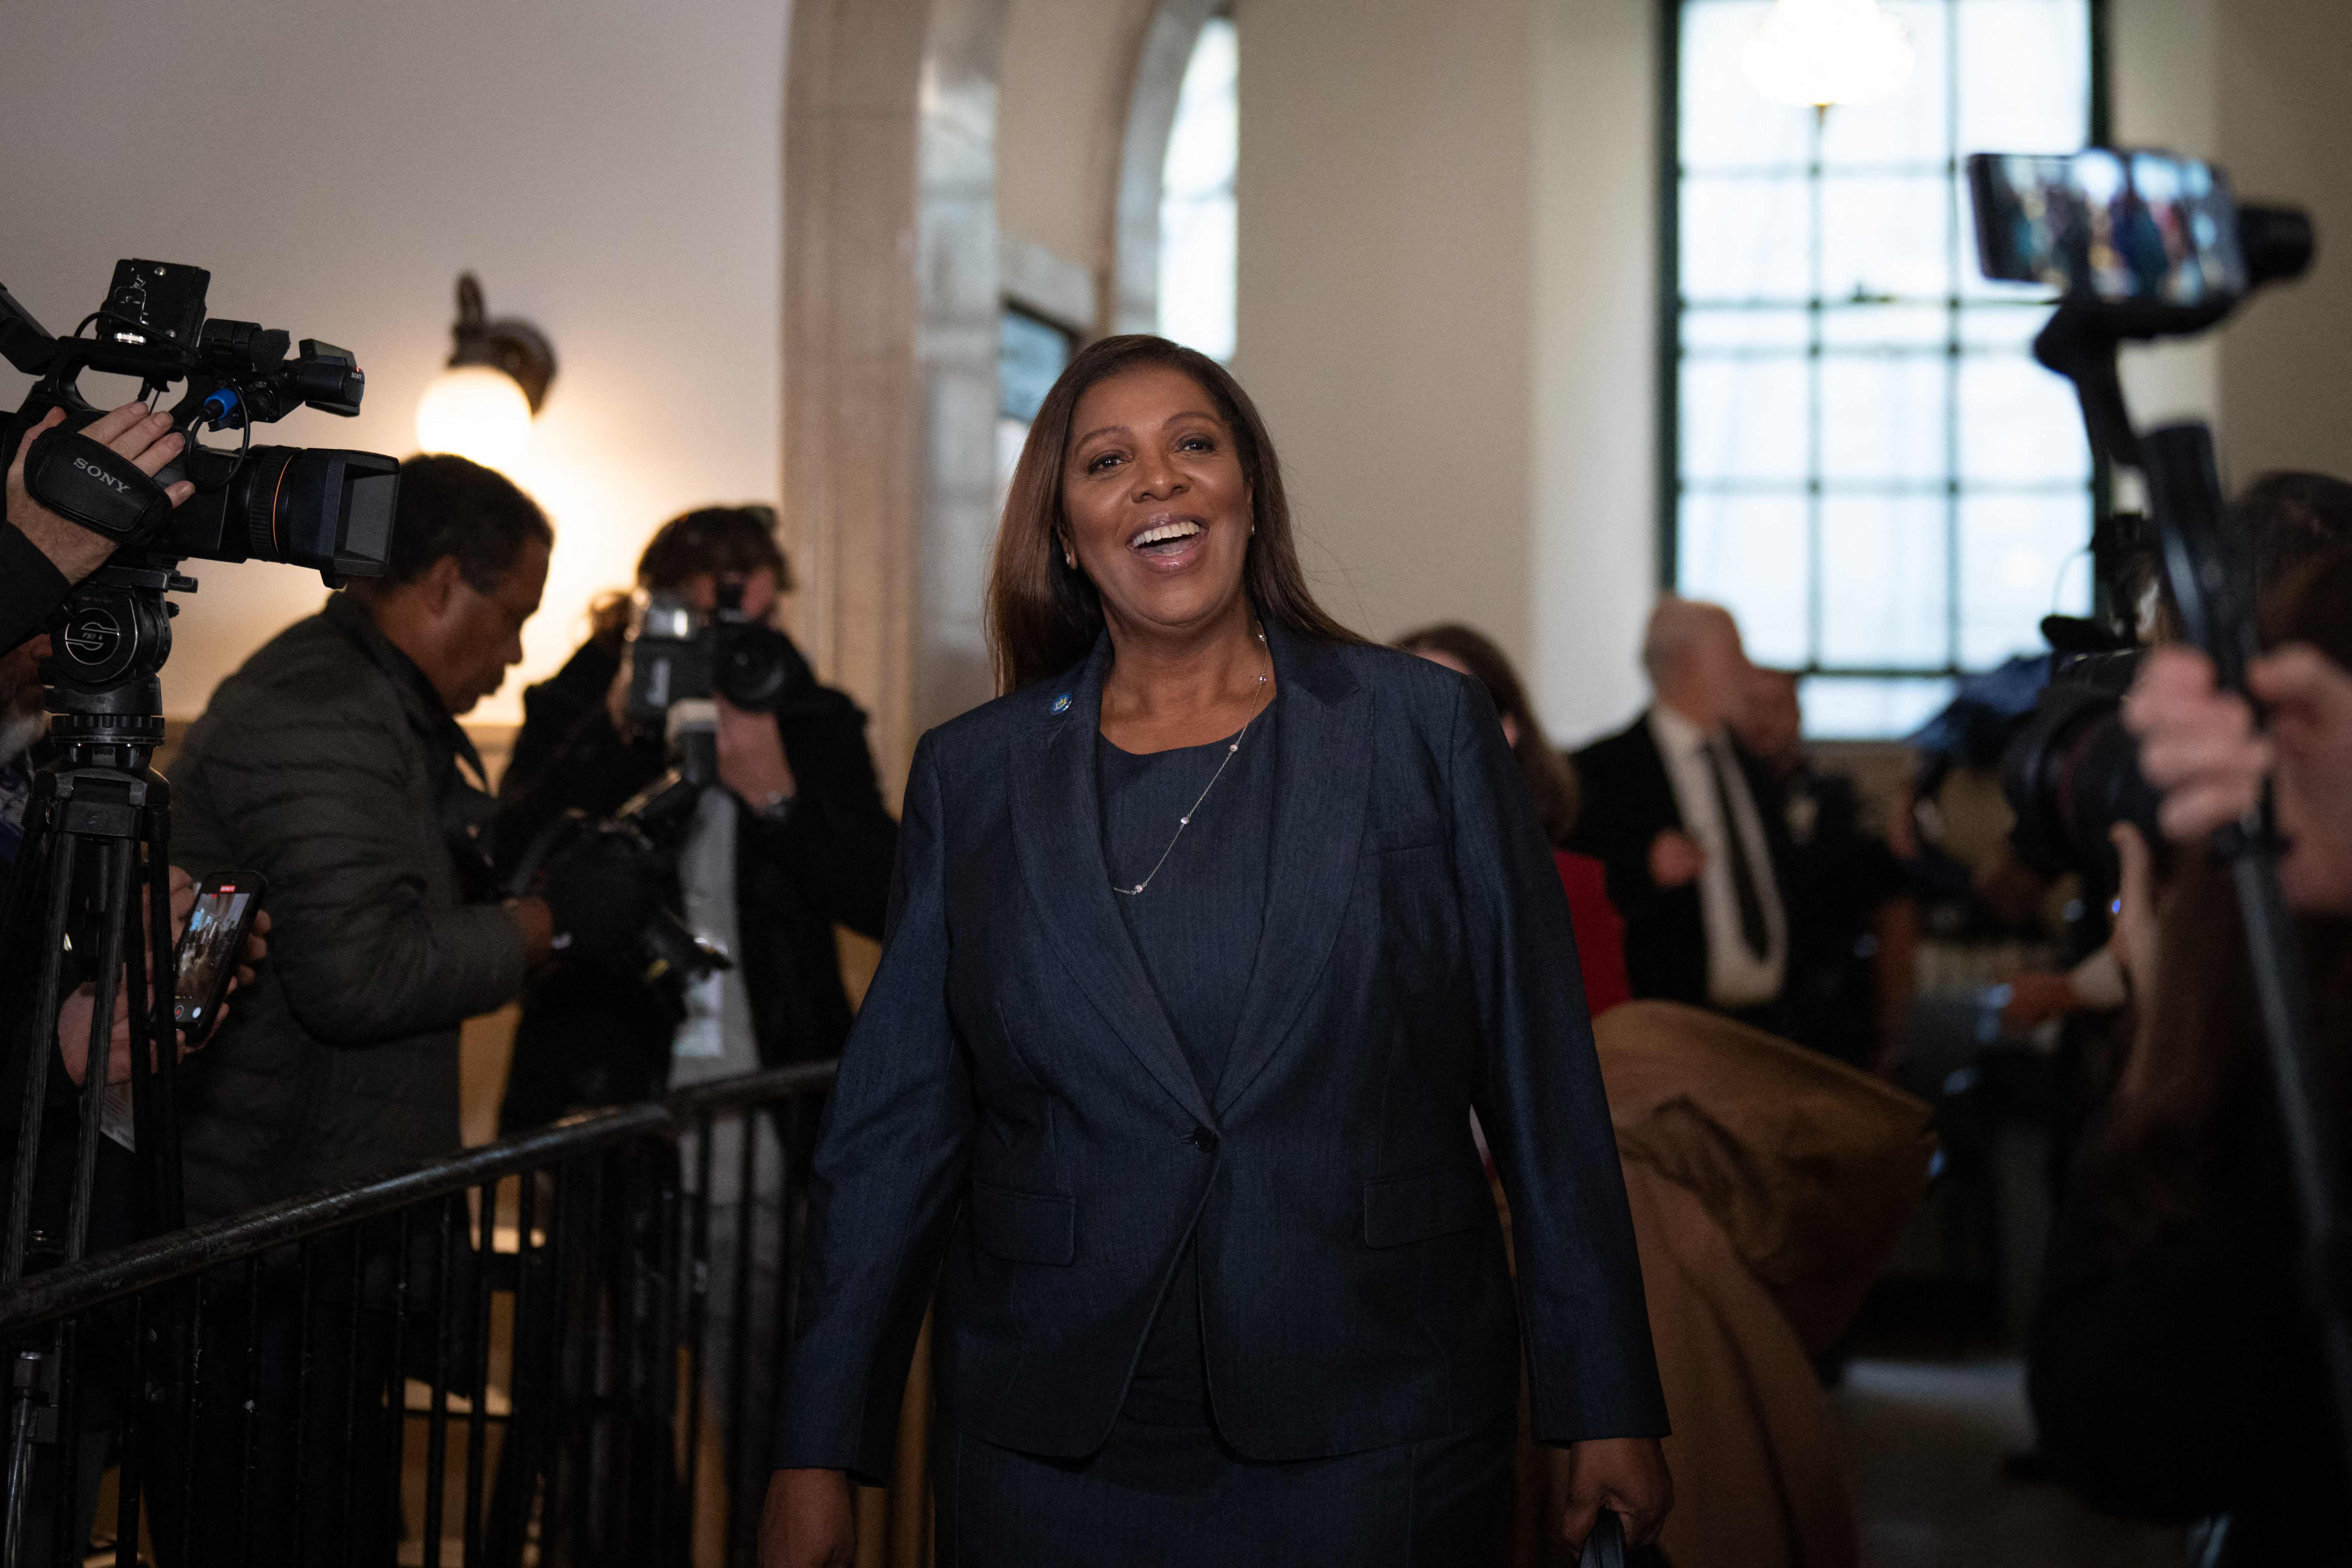 New York attorney general Letitia James walks into the courtroom to hear Ivanka Trump’s testimony